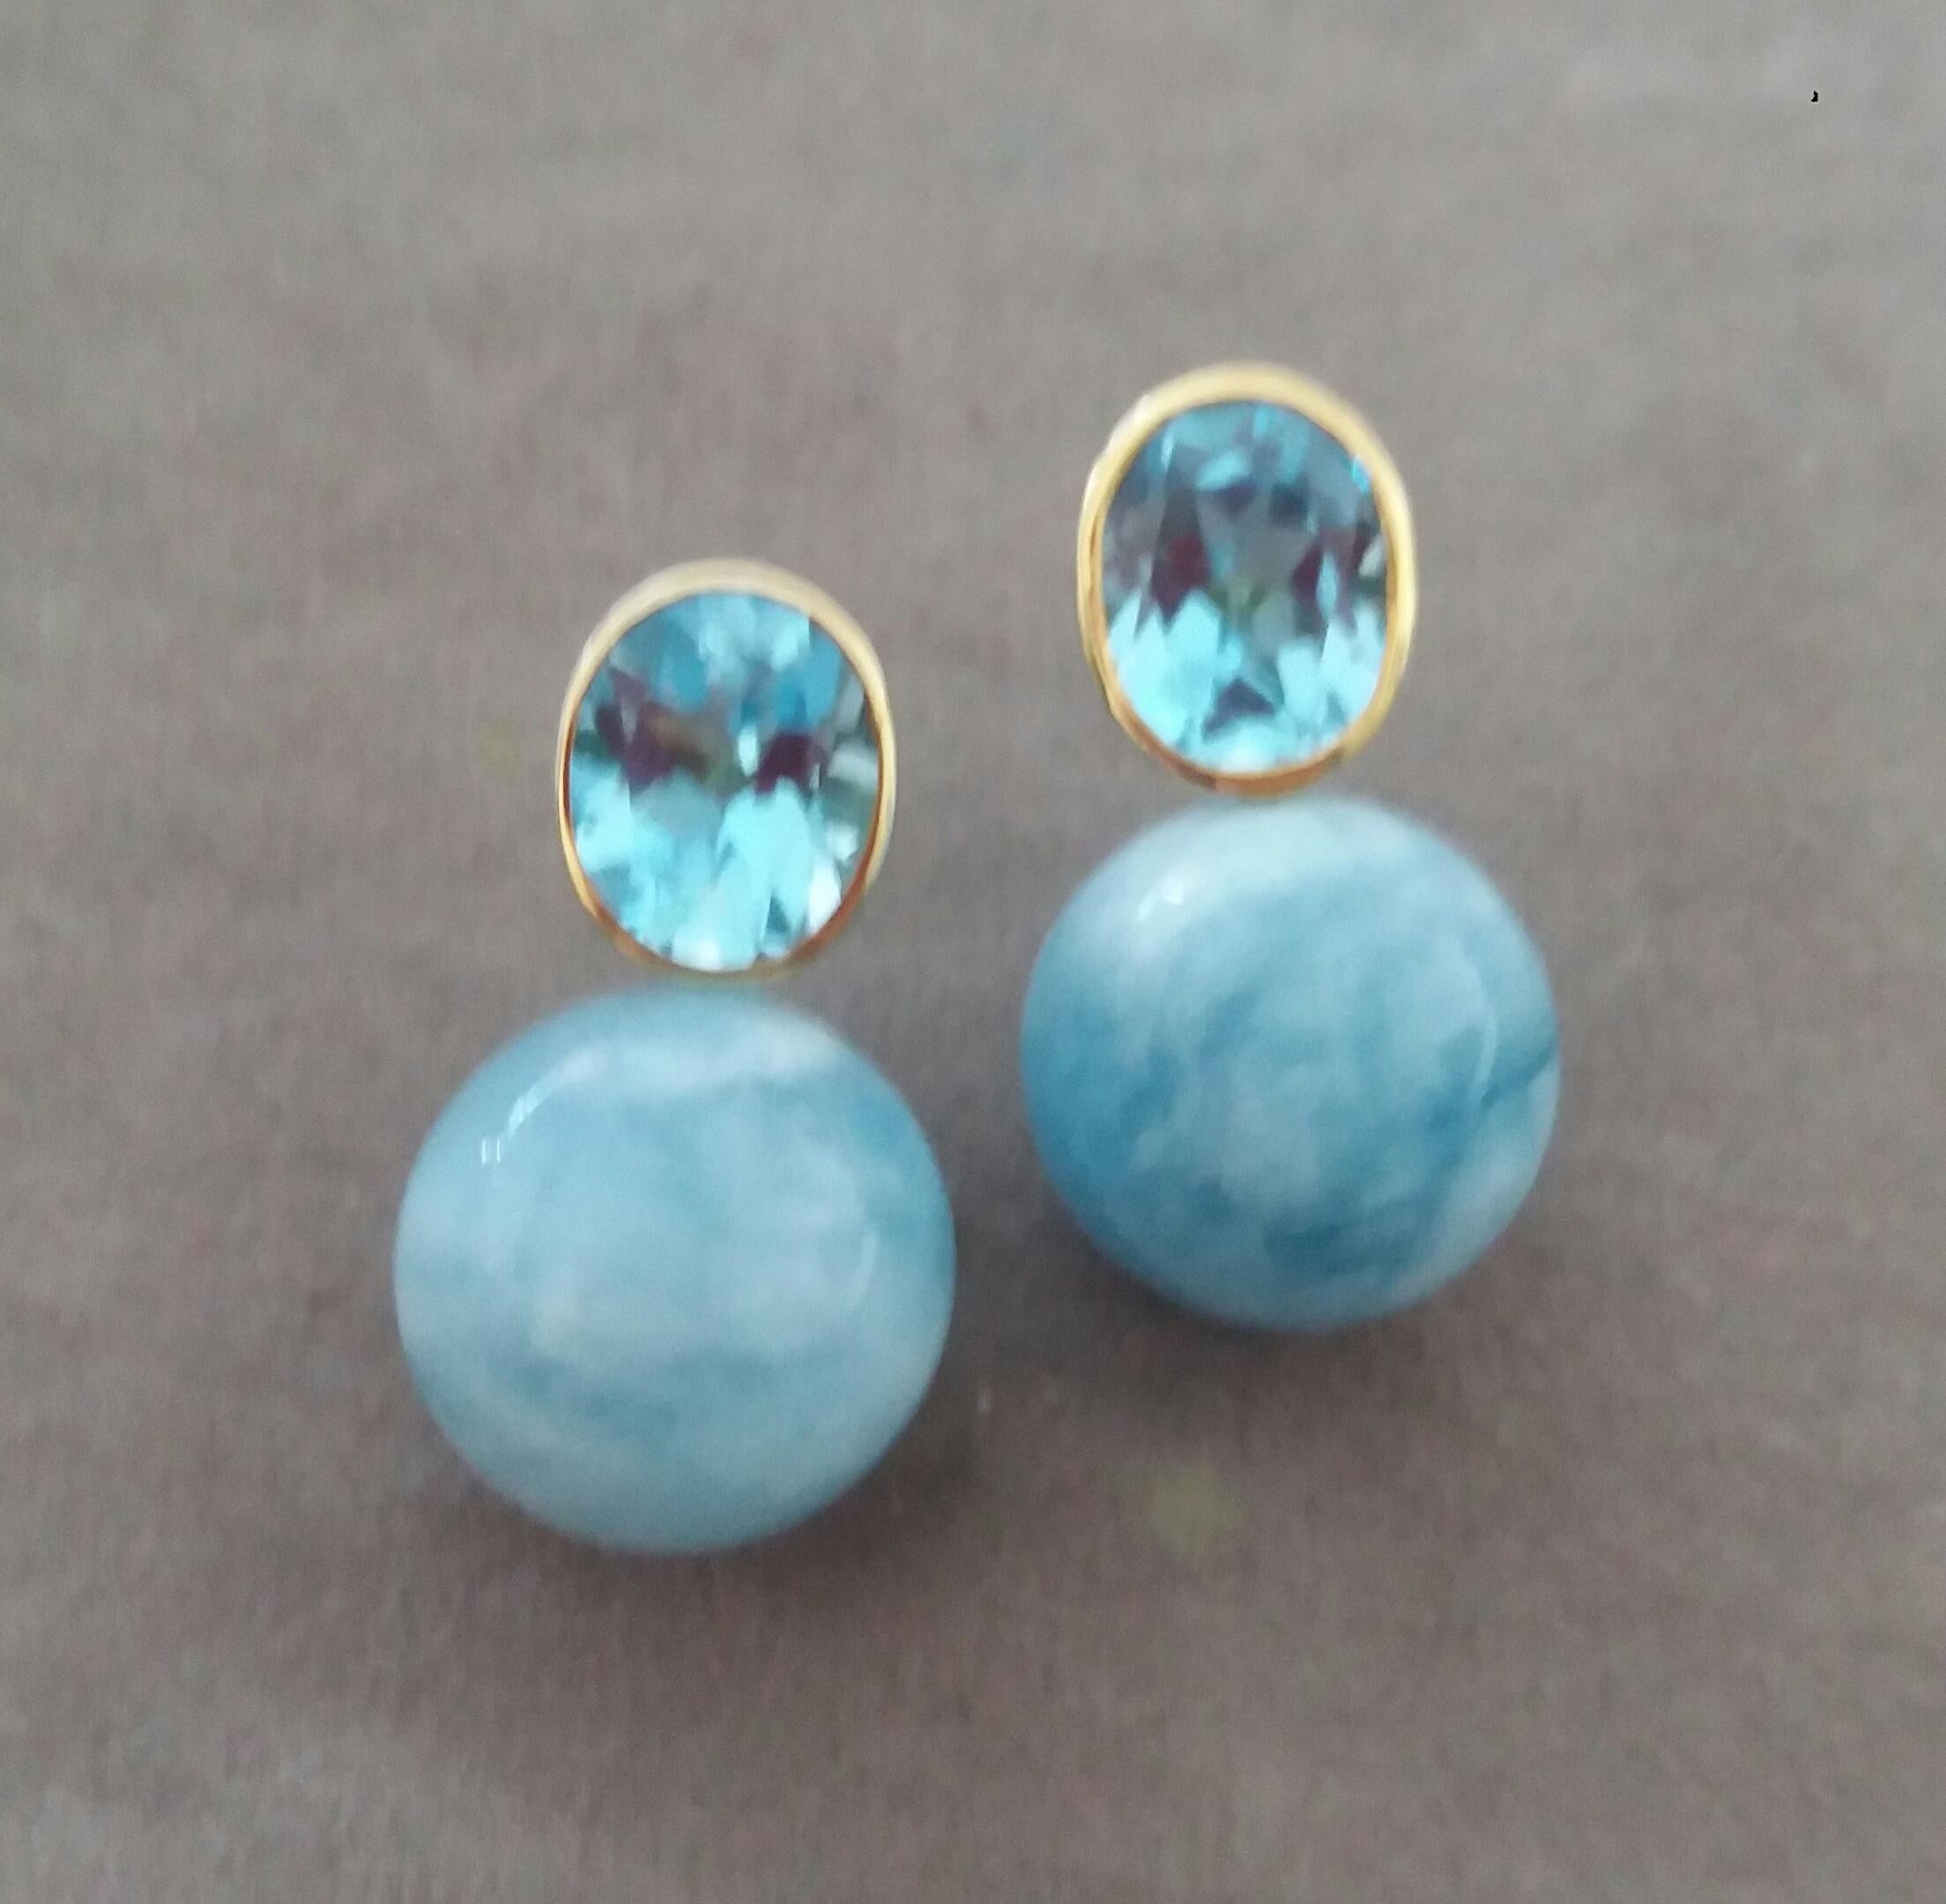 Mixed Cut Oval Faceted Sky Blue Topaz 14k Gold Aquamarine Plain Round Beads Stud Earrings For Sale